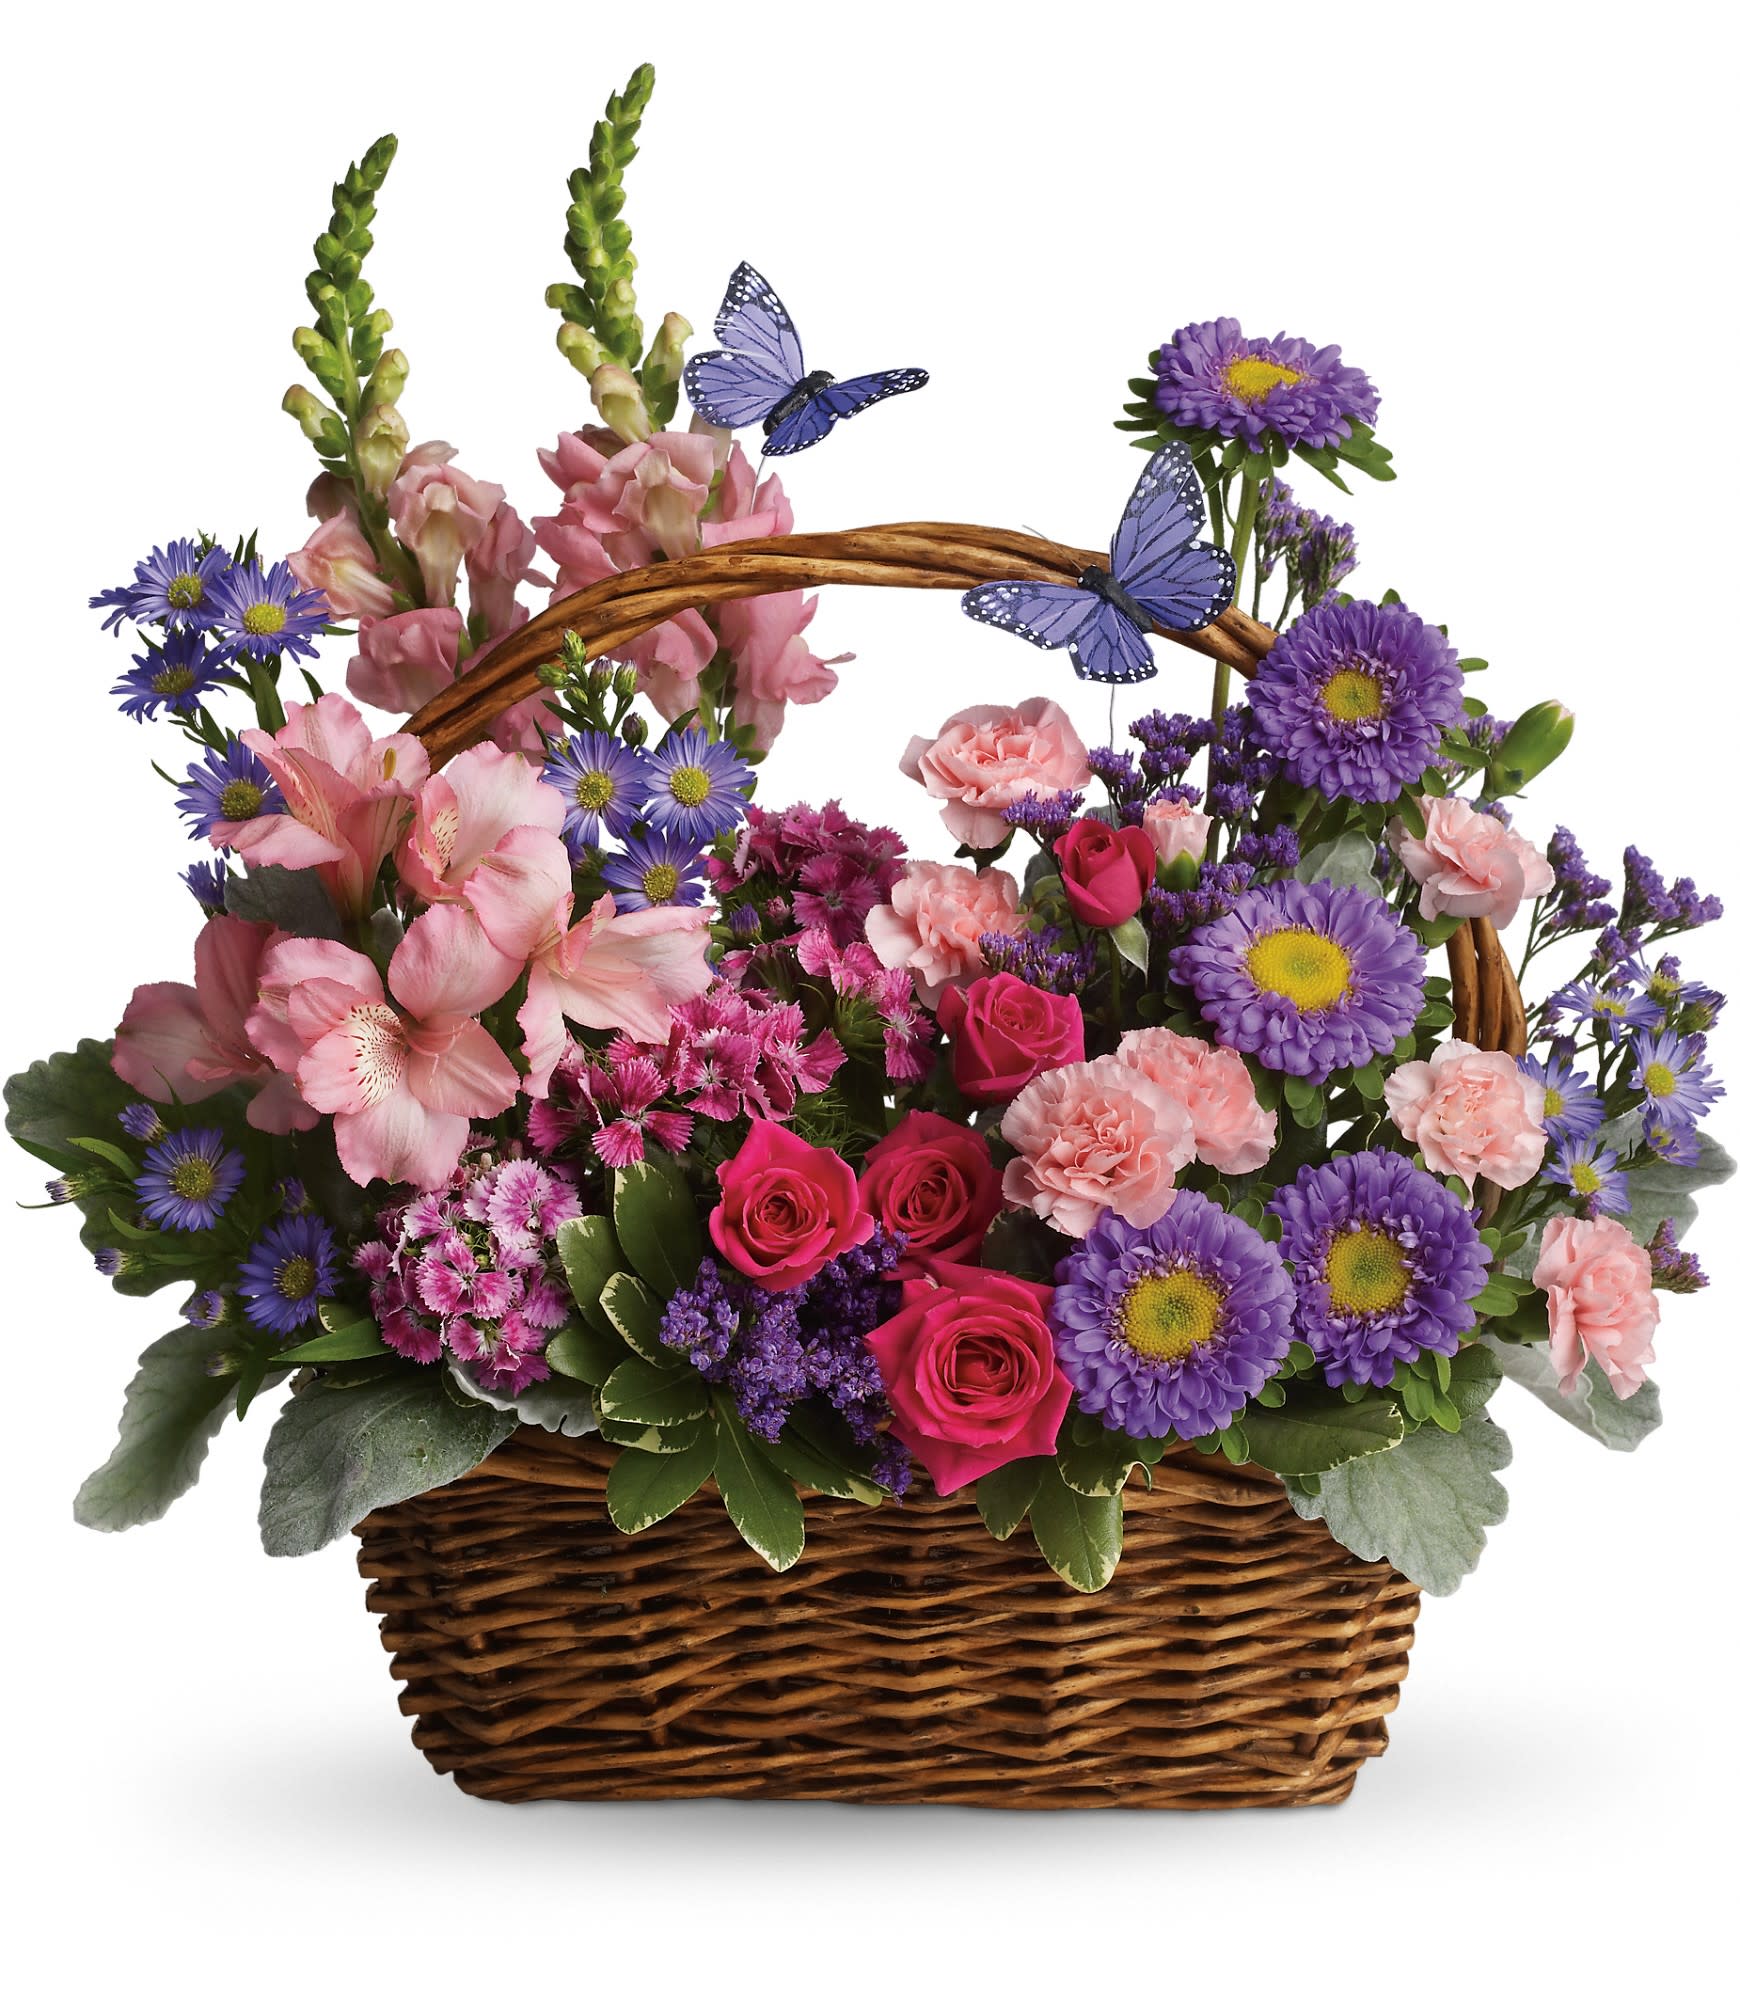 Country Basket Blooms by Teleflora - Talk about a bountiful basket! This wicker basket is overflowing with beauty and blossoms. It's no wonder two pretty butterflies have made this basket their home. 